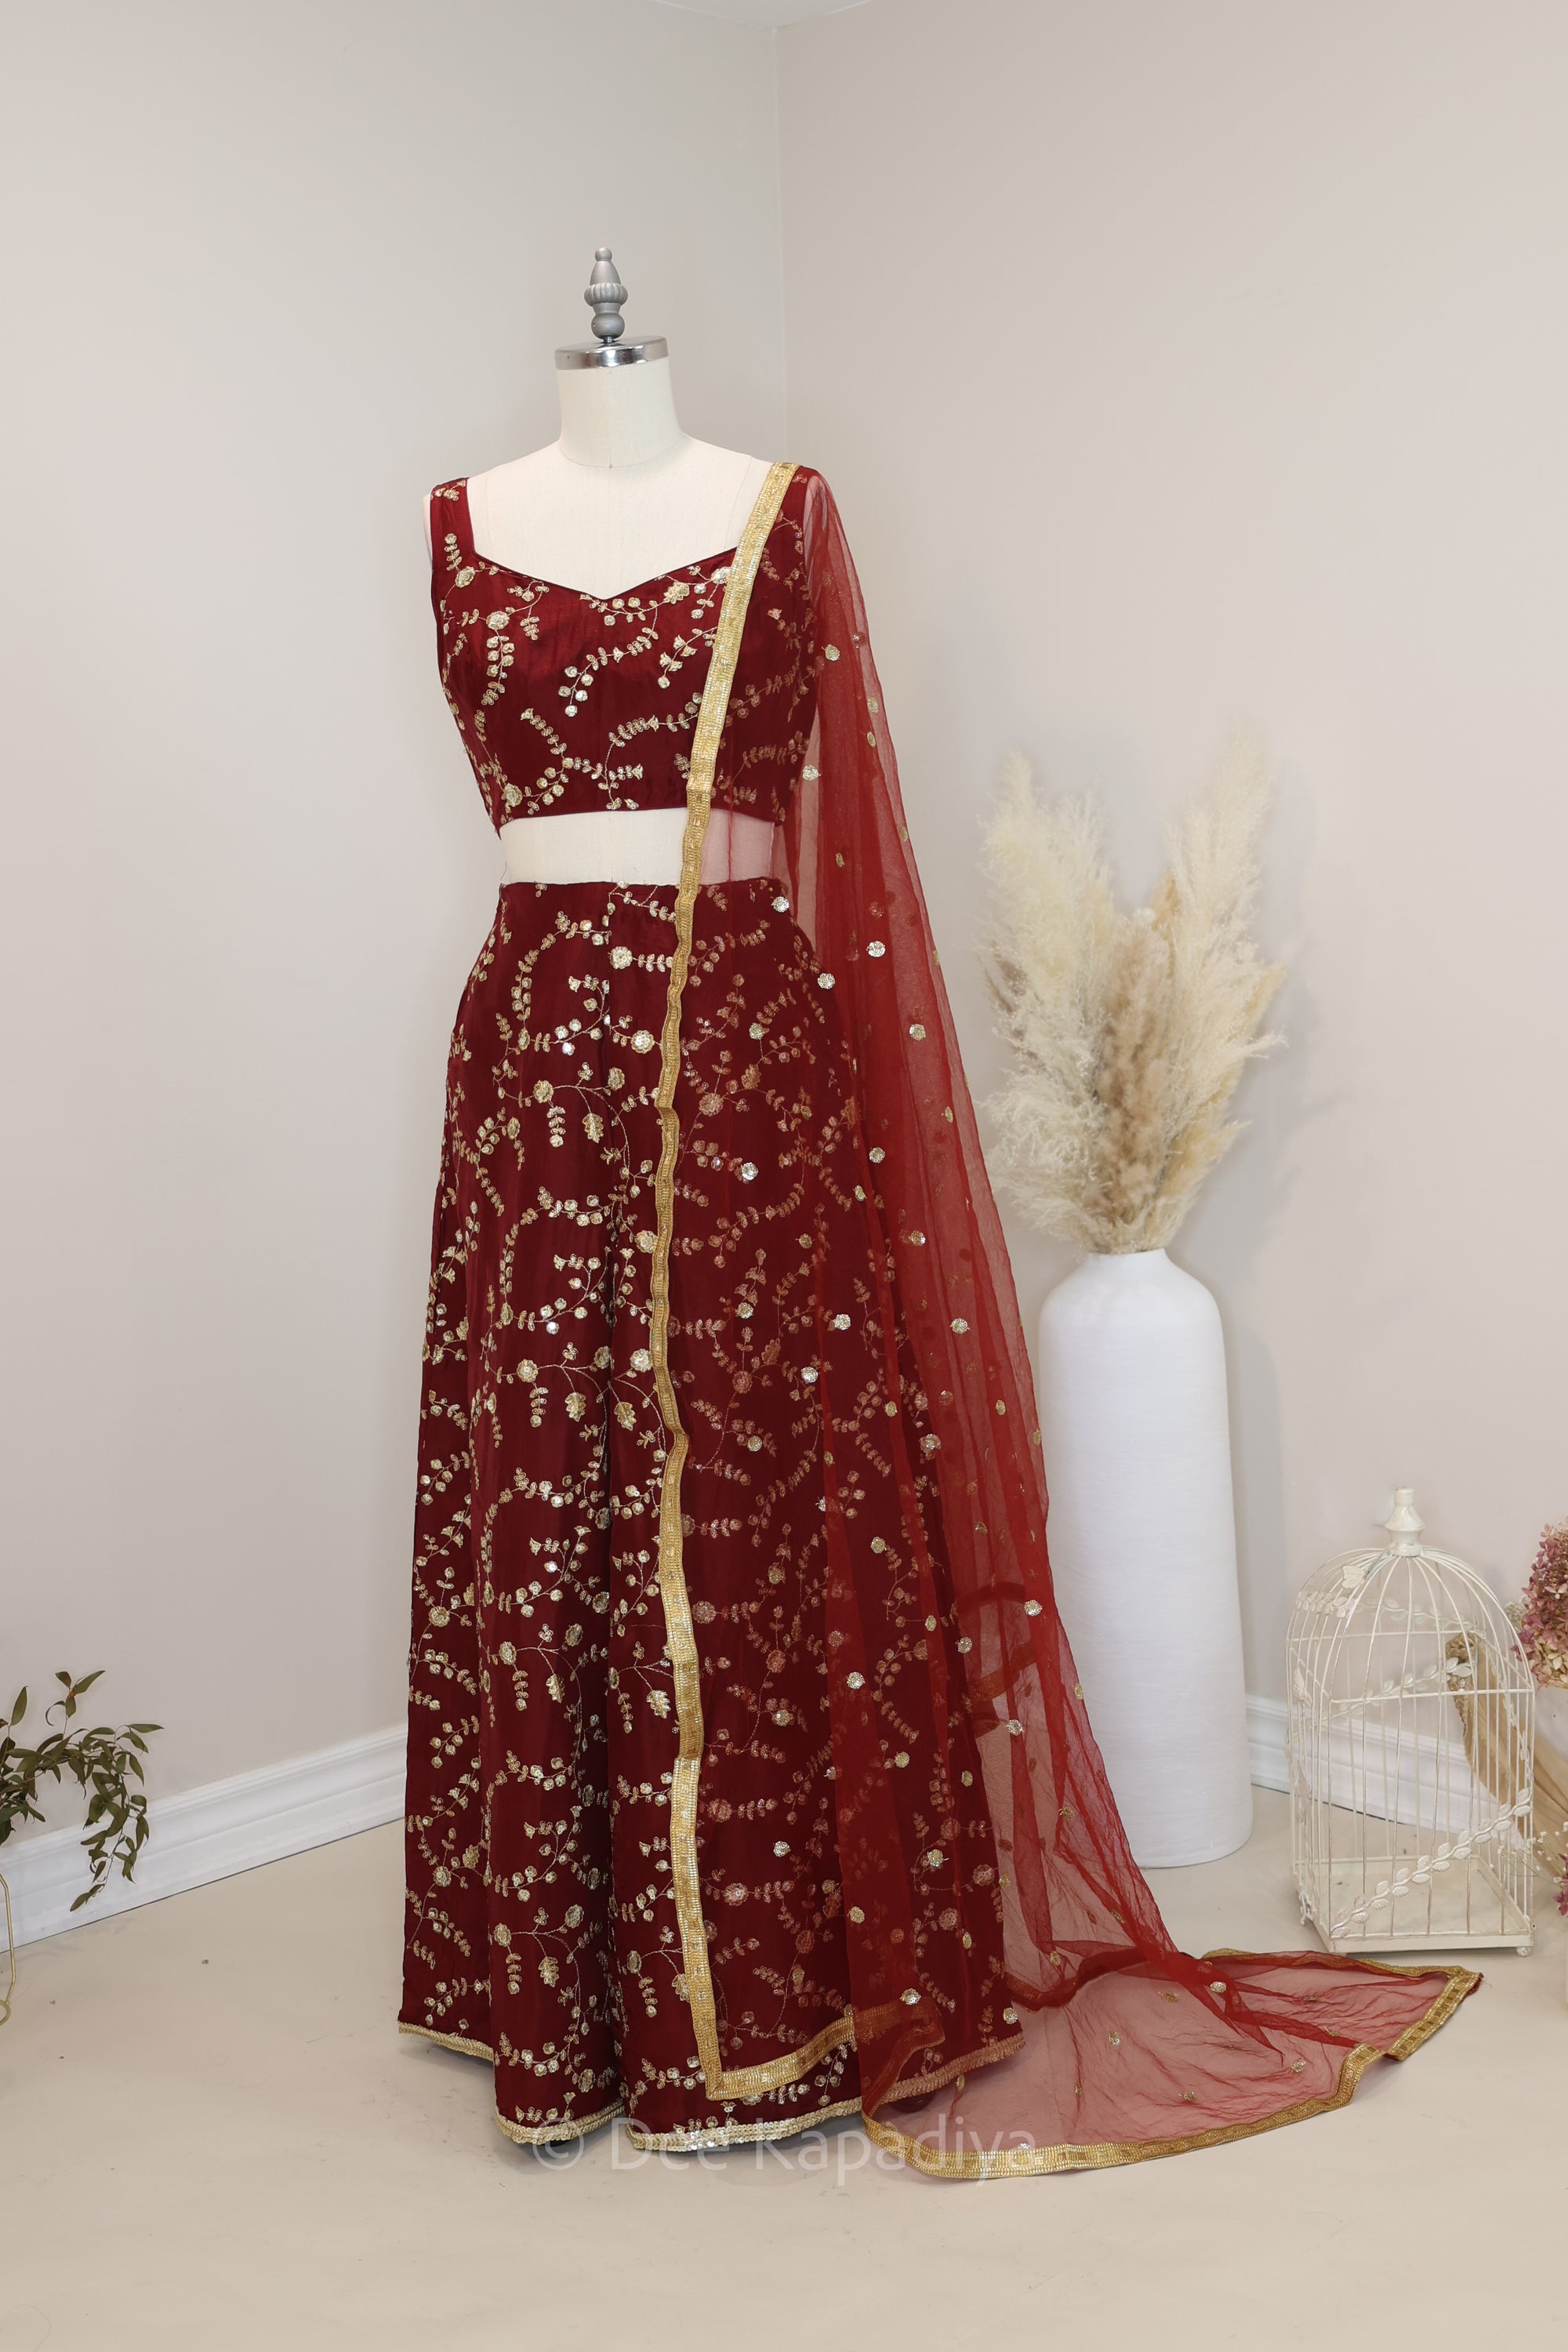 Zari floral embroidery MAROON palazzo sets. Get the sparkle on this season! PERFECT FOR GUEST AT A WEDDING.